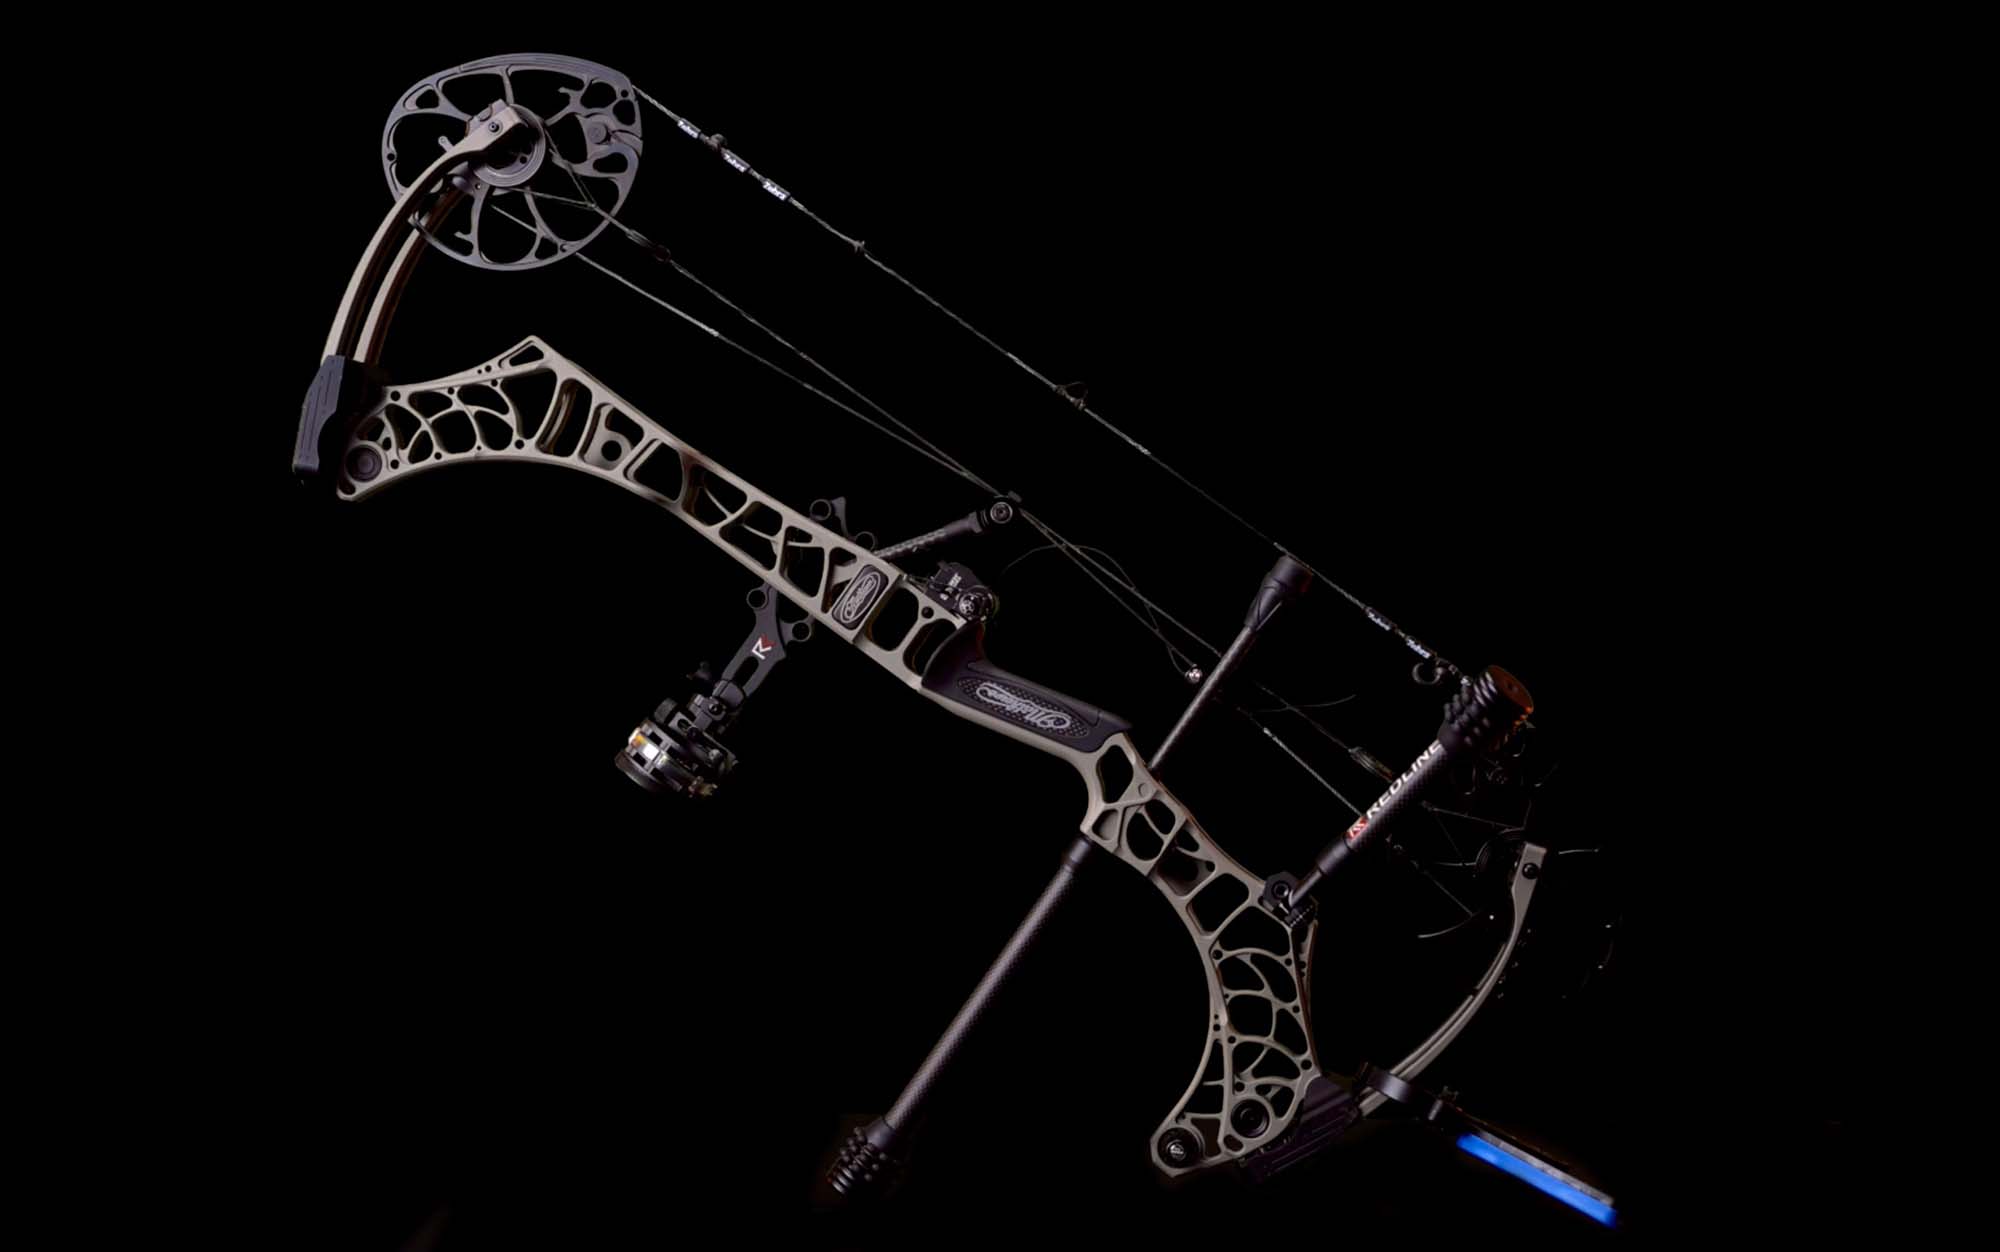 Bow Hunting Gear photo